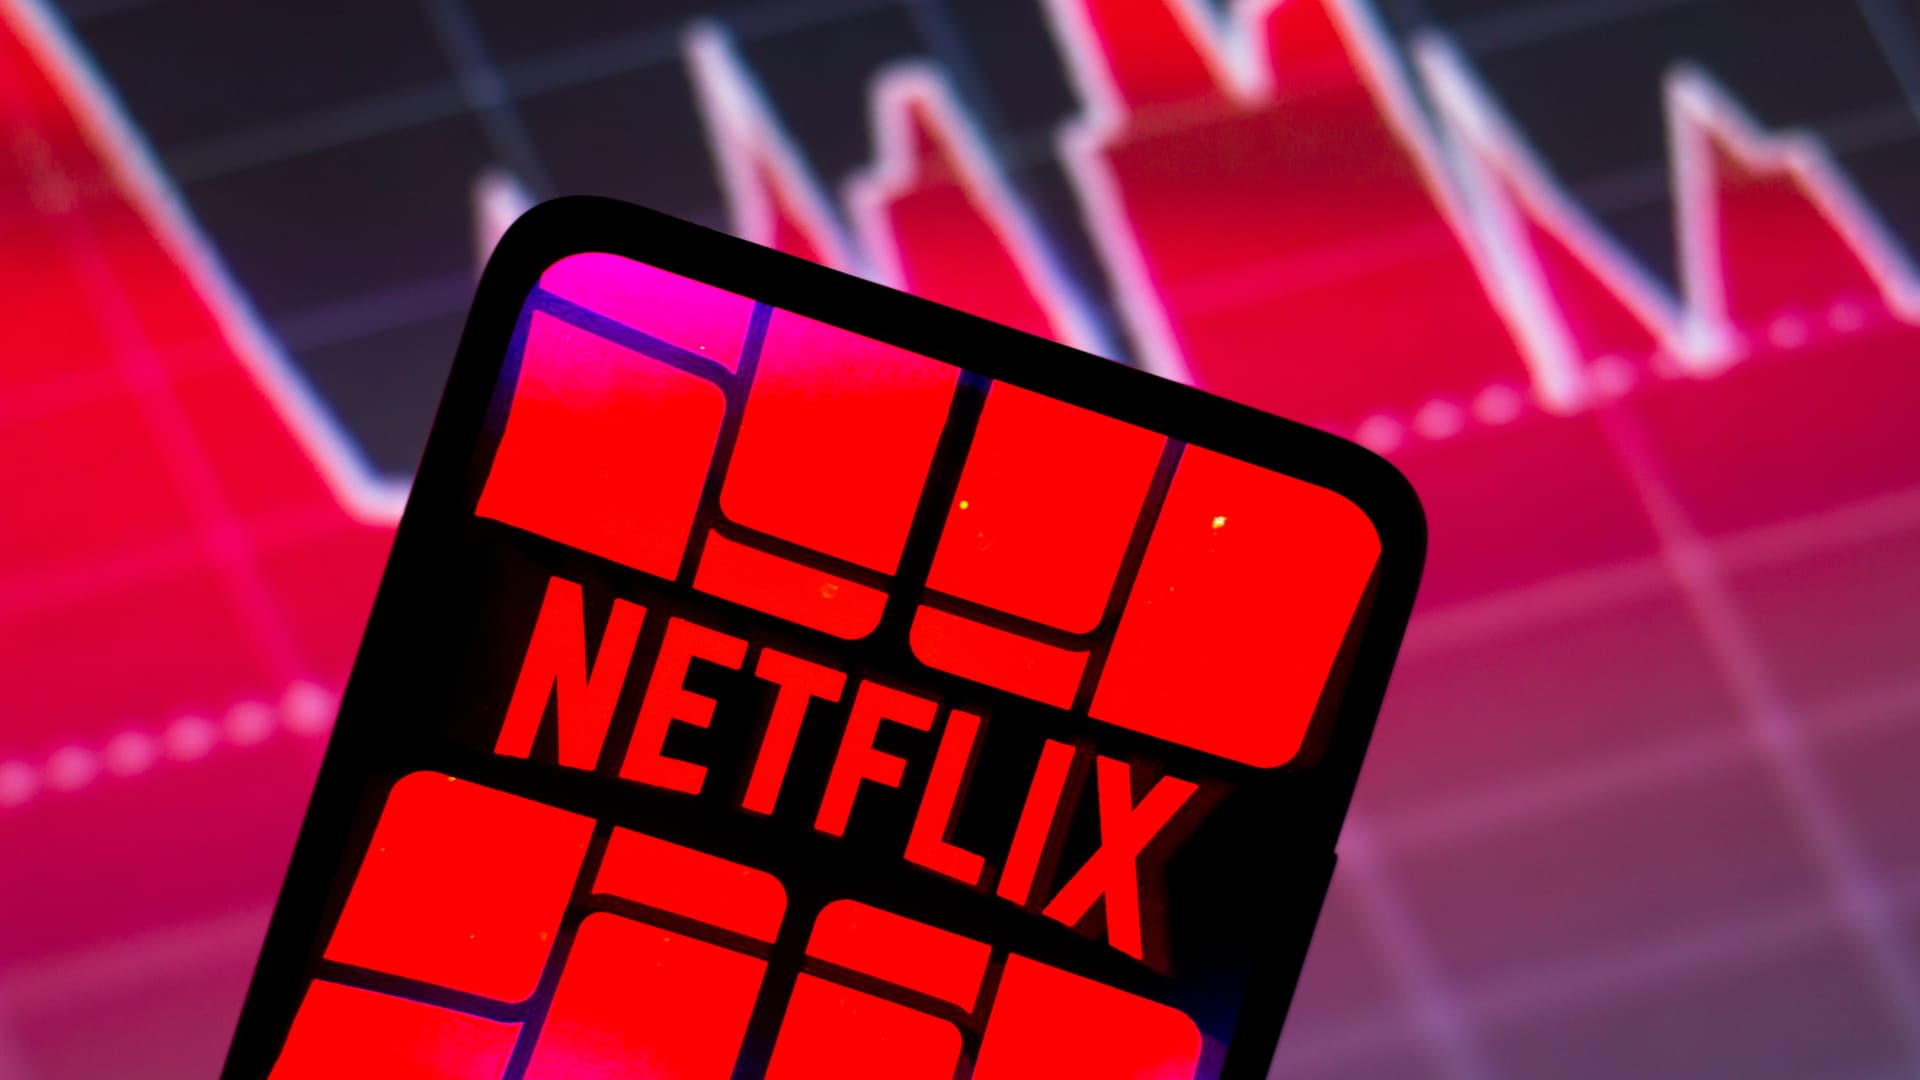 Strong earnings may not be enough to bring Netflix out of its funk, Credit Suisse says